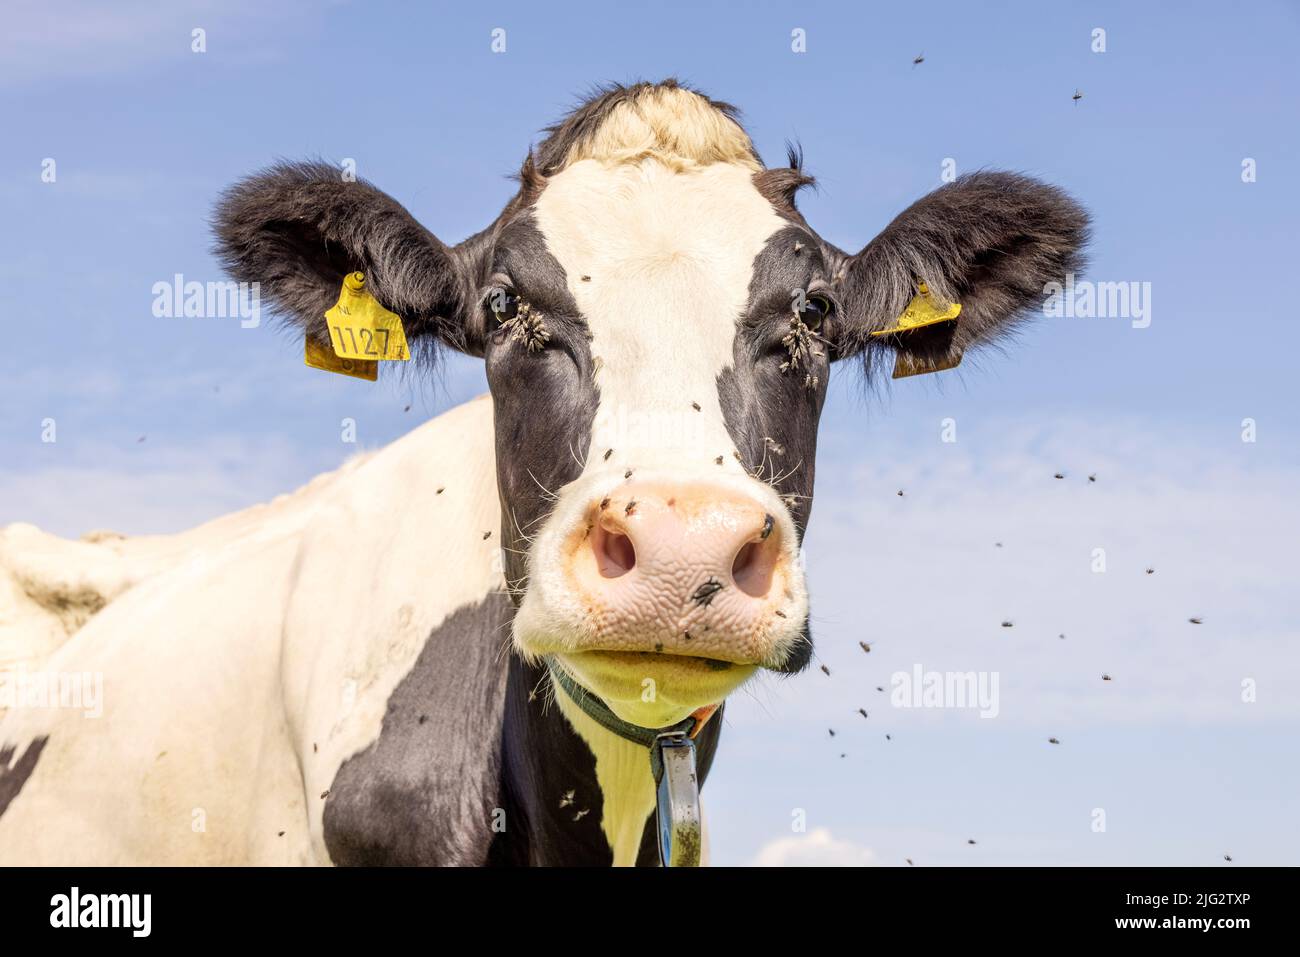 Cow and flies, buzzing and flying and in eyes, cute and calm bovine, large pink nose and friendly expression Stock Photo